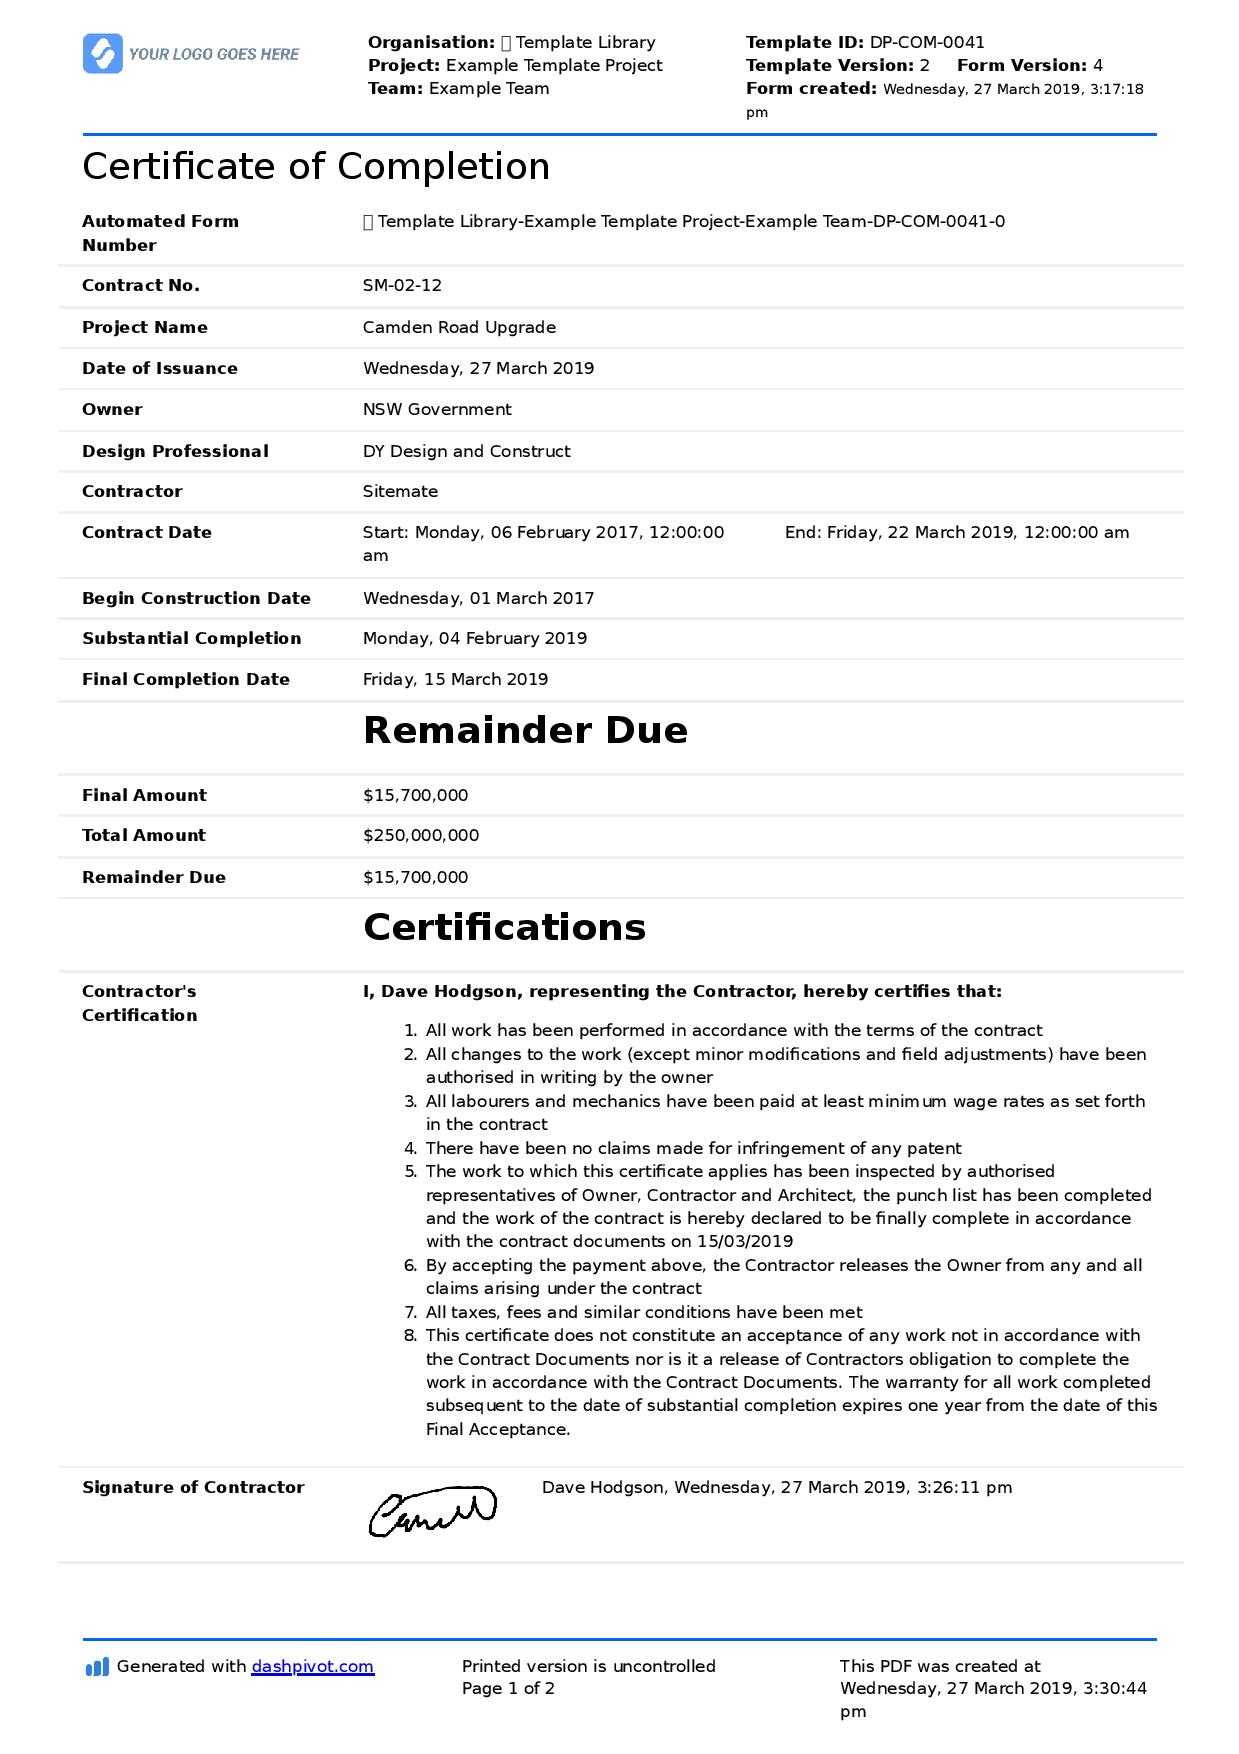 Certificate Of Completion For Construction (Free Template + With Regard To Certificate Of Completion Construction Templates